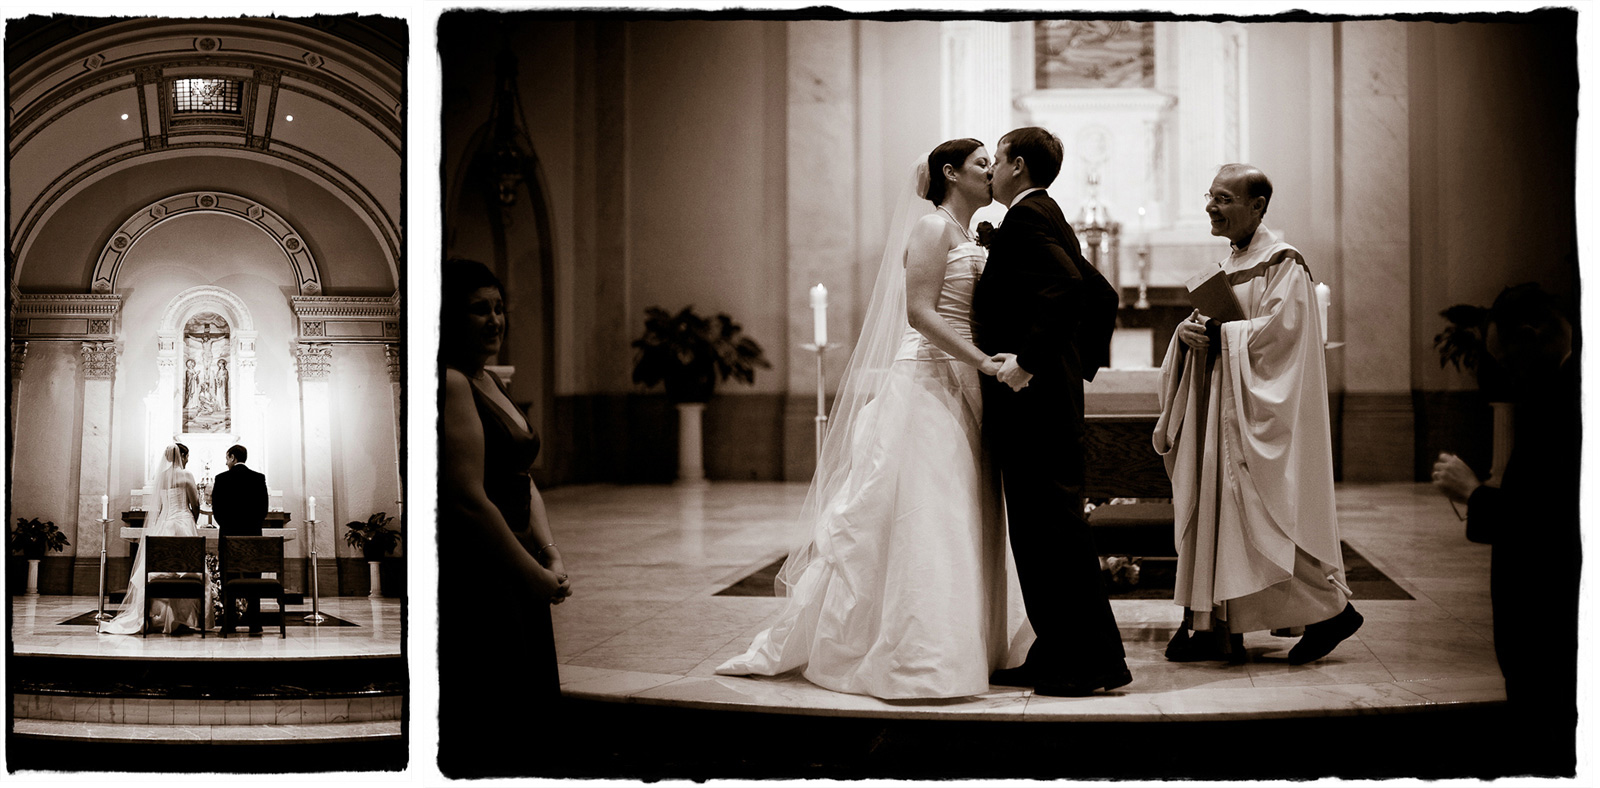 Elizabeth and Brendan share their first kiss as husband and wife in this lovely church ceremony.